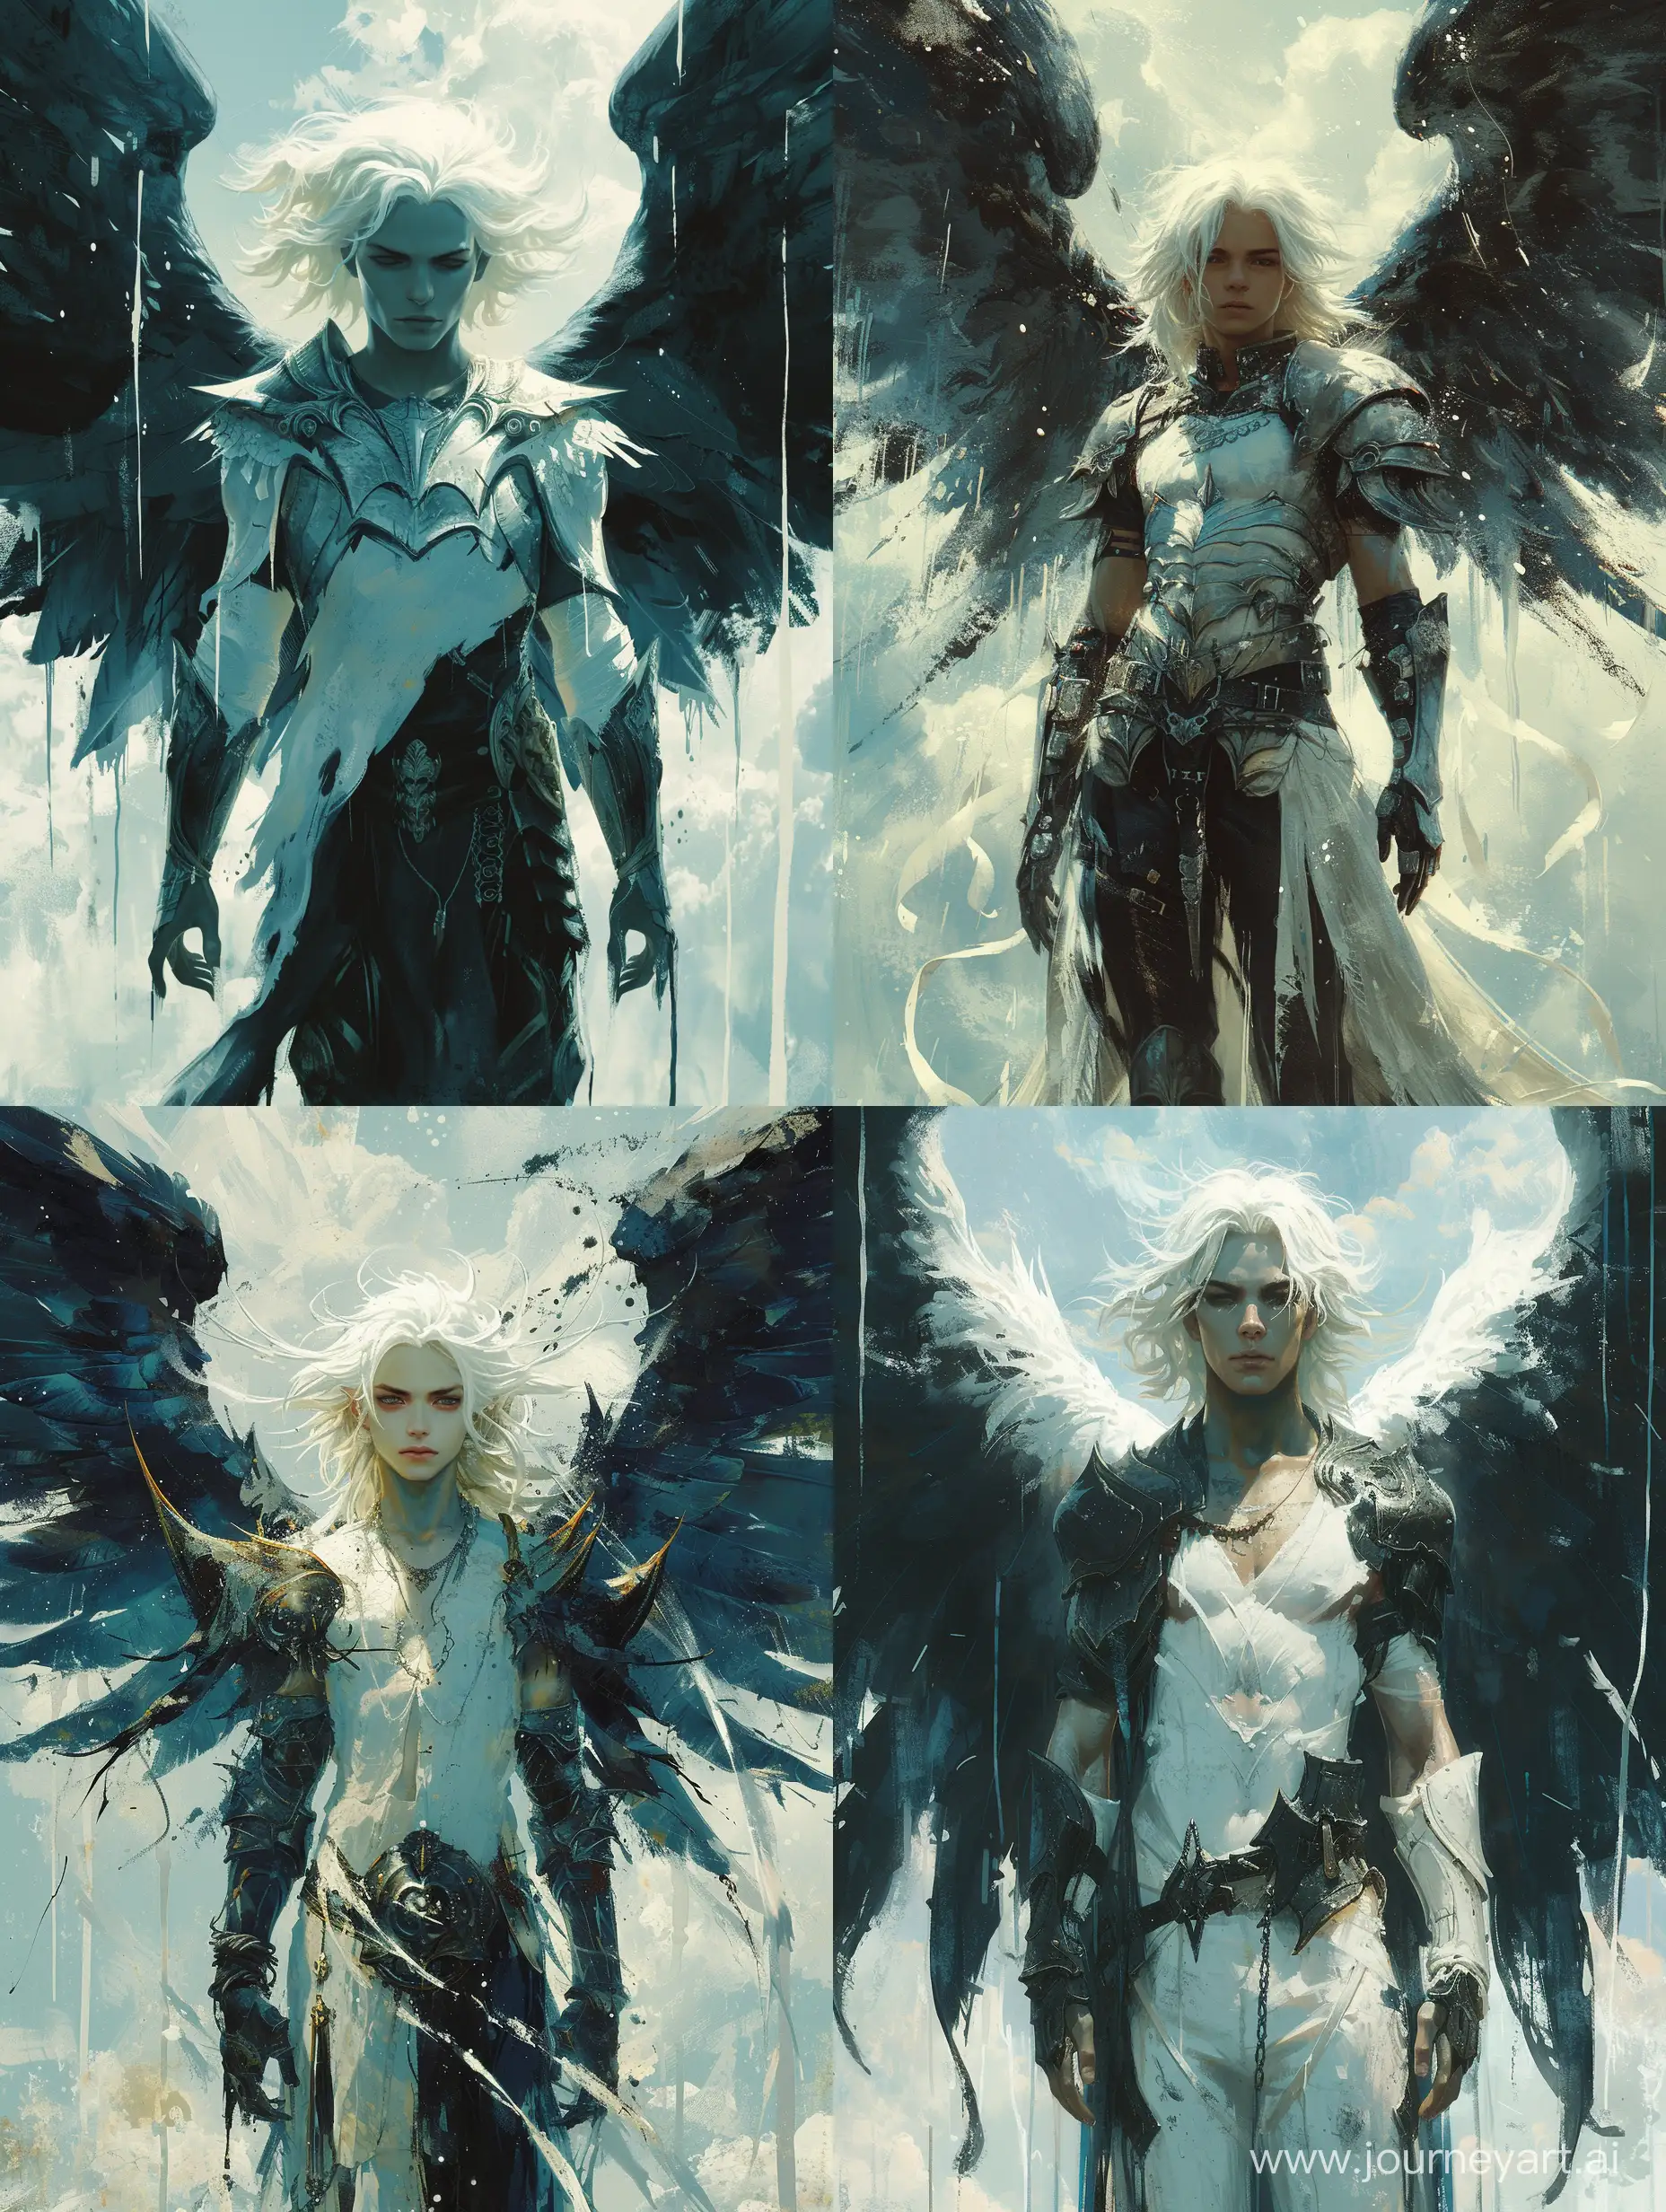 Epic, stands in an interesting pose, white angel with large black wings, standing in front of a sky background with white and blue hues, the angel has white hair and is wearing a armor-like outfit, the wings are spread out and there are white paint drips trailing from them, --s 500